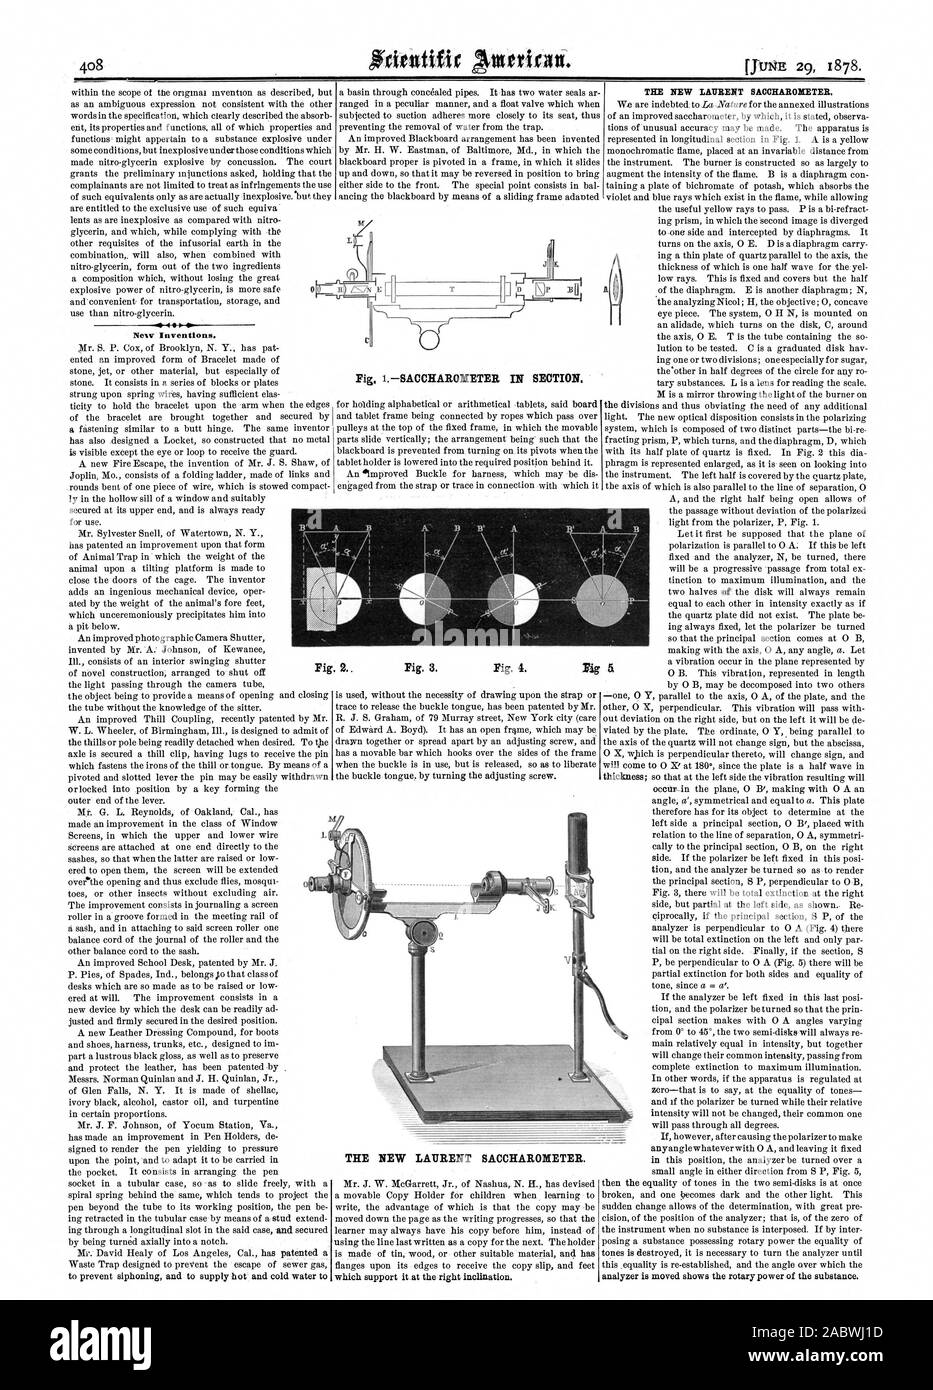 new inventions the new laurent baogharoneter analyzer is moved shows the rotary power of the substance fig saccharodieter in section fig 2 fig 3 fig 4 the new latirent saccharometer scientific american 1878 06 29 2ABWJ1D